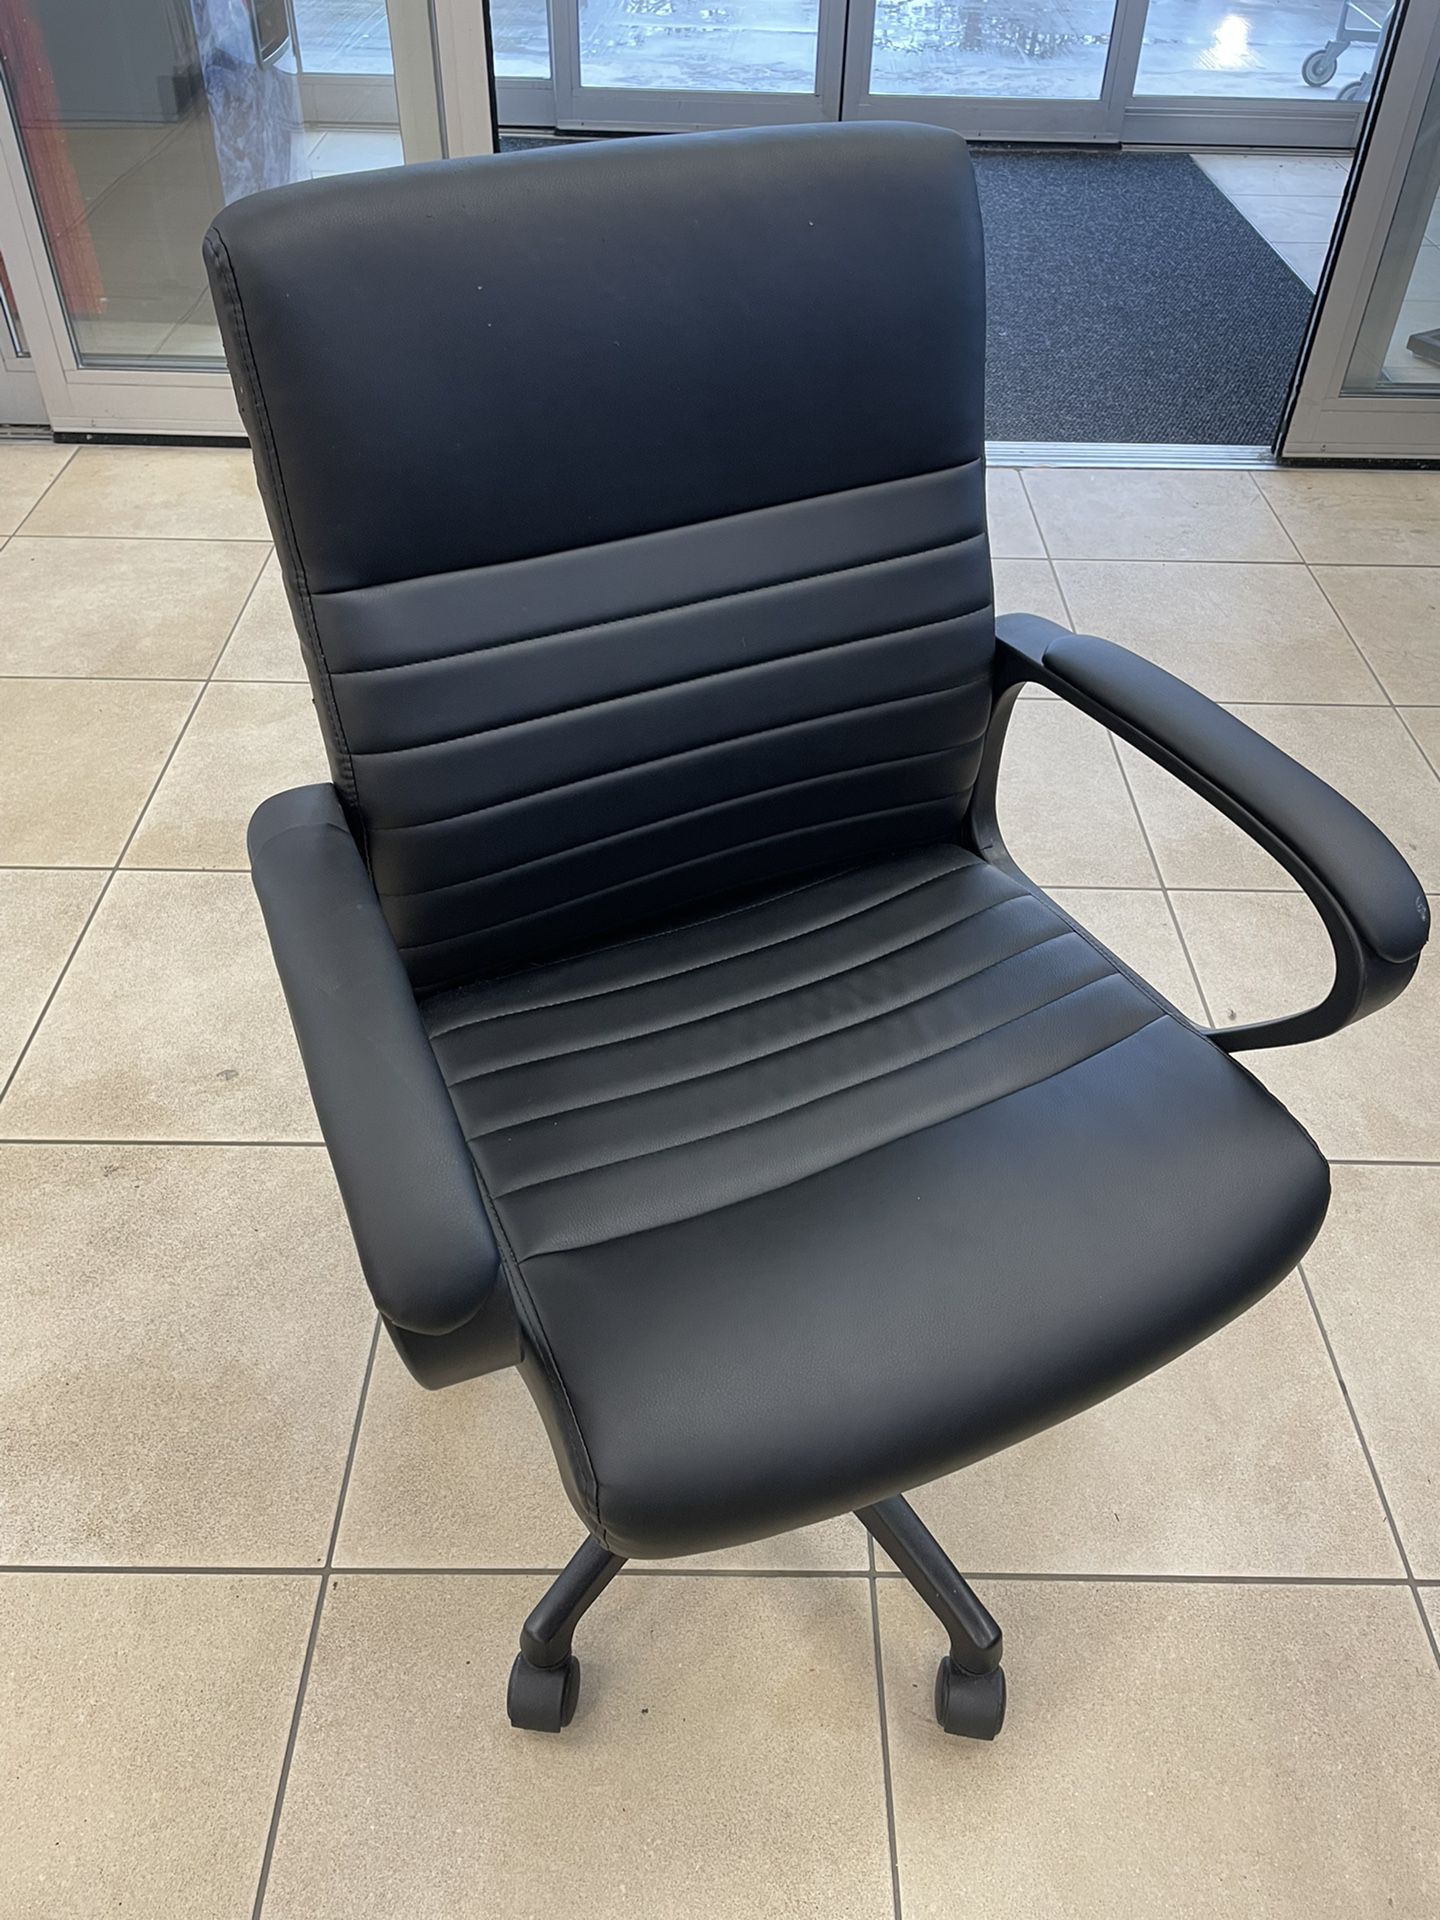 Black Leather Office Chair 